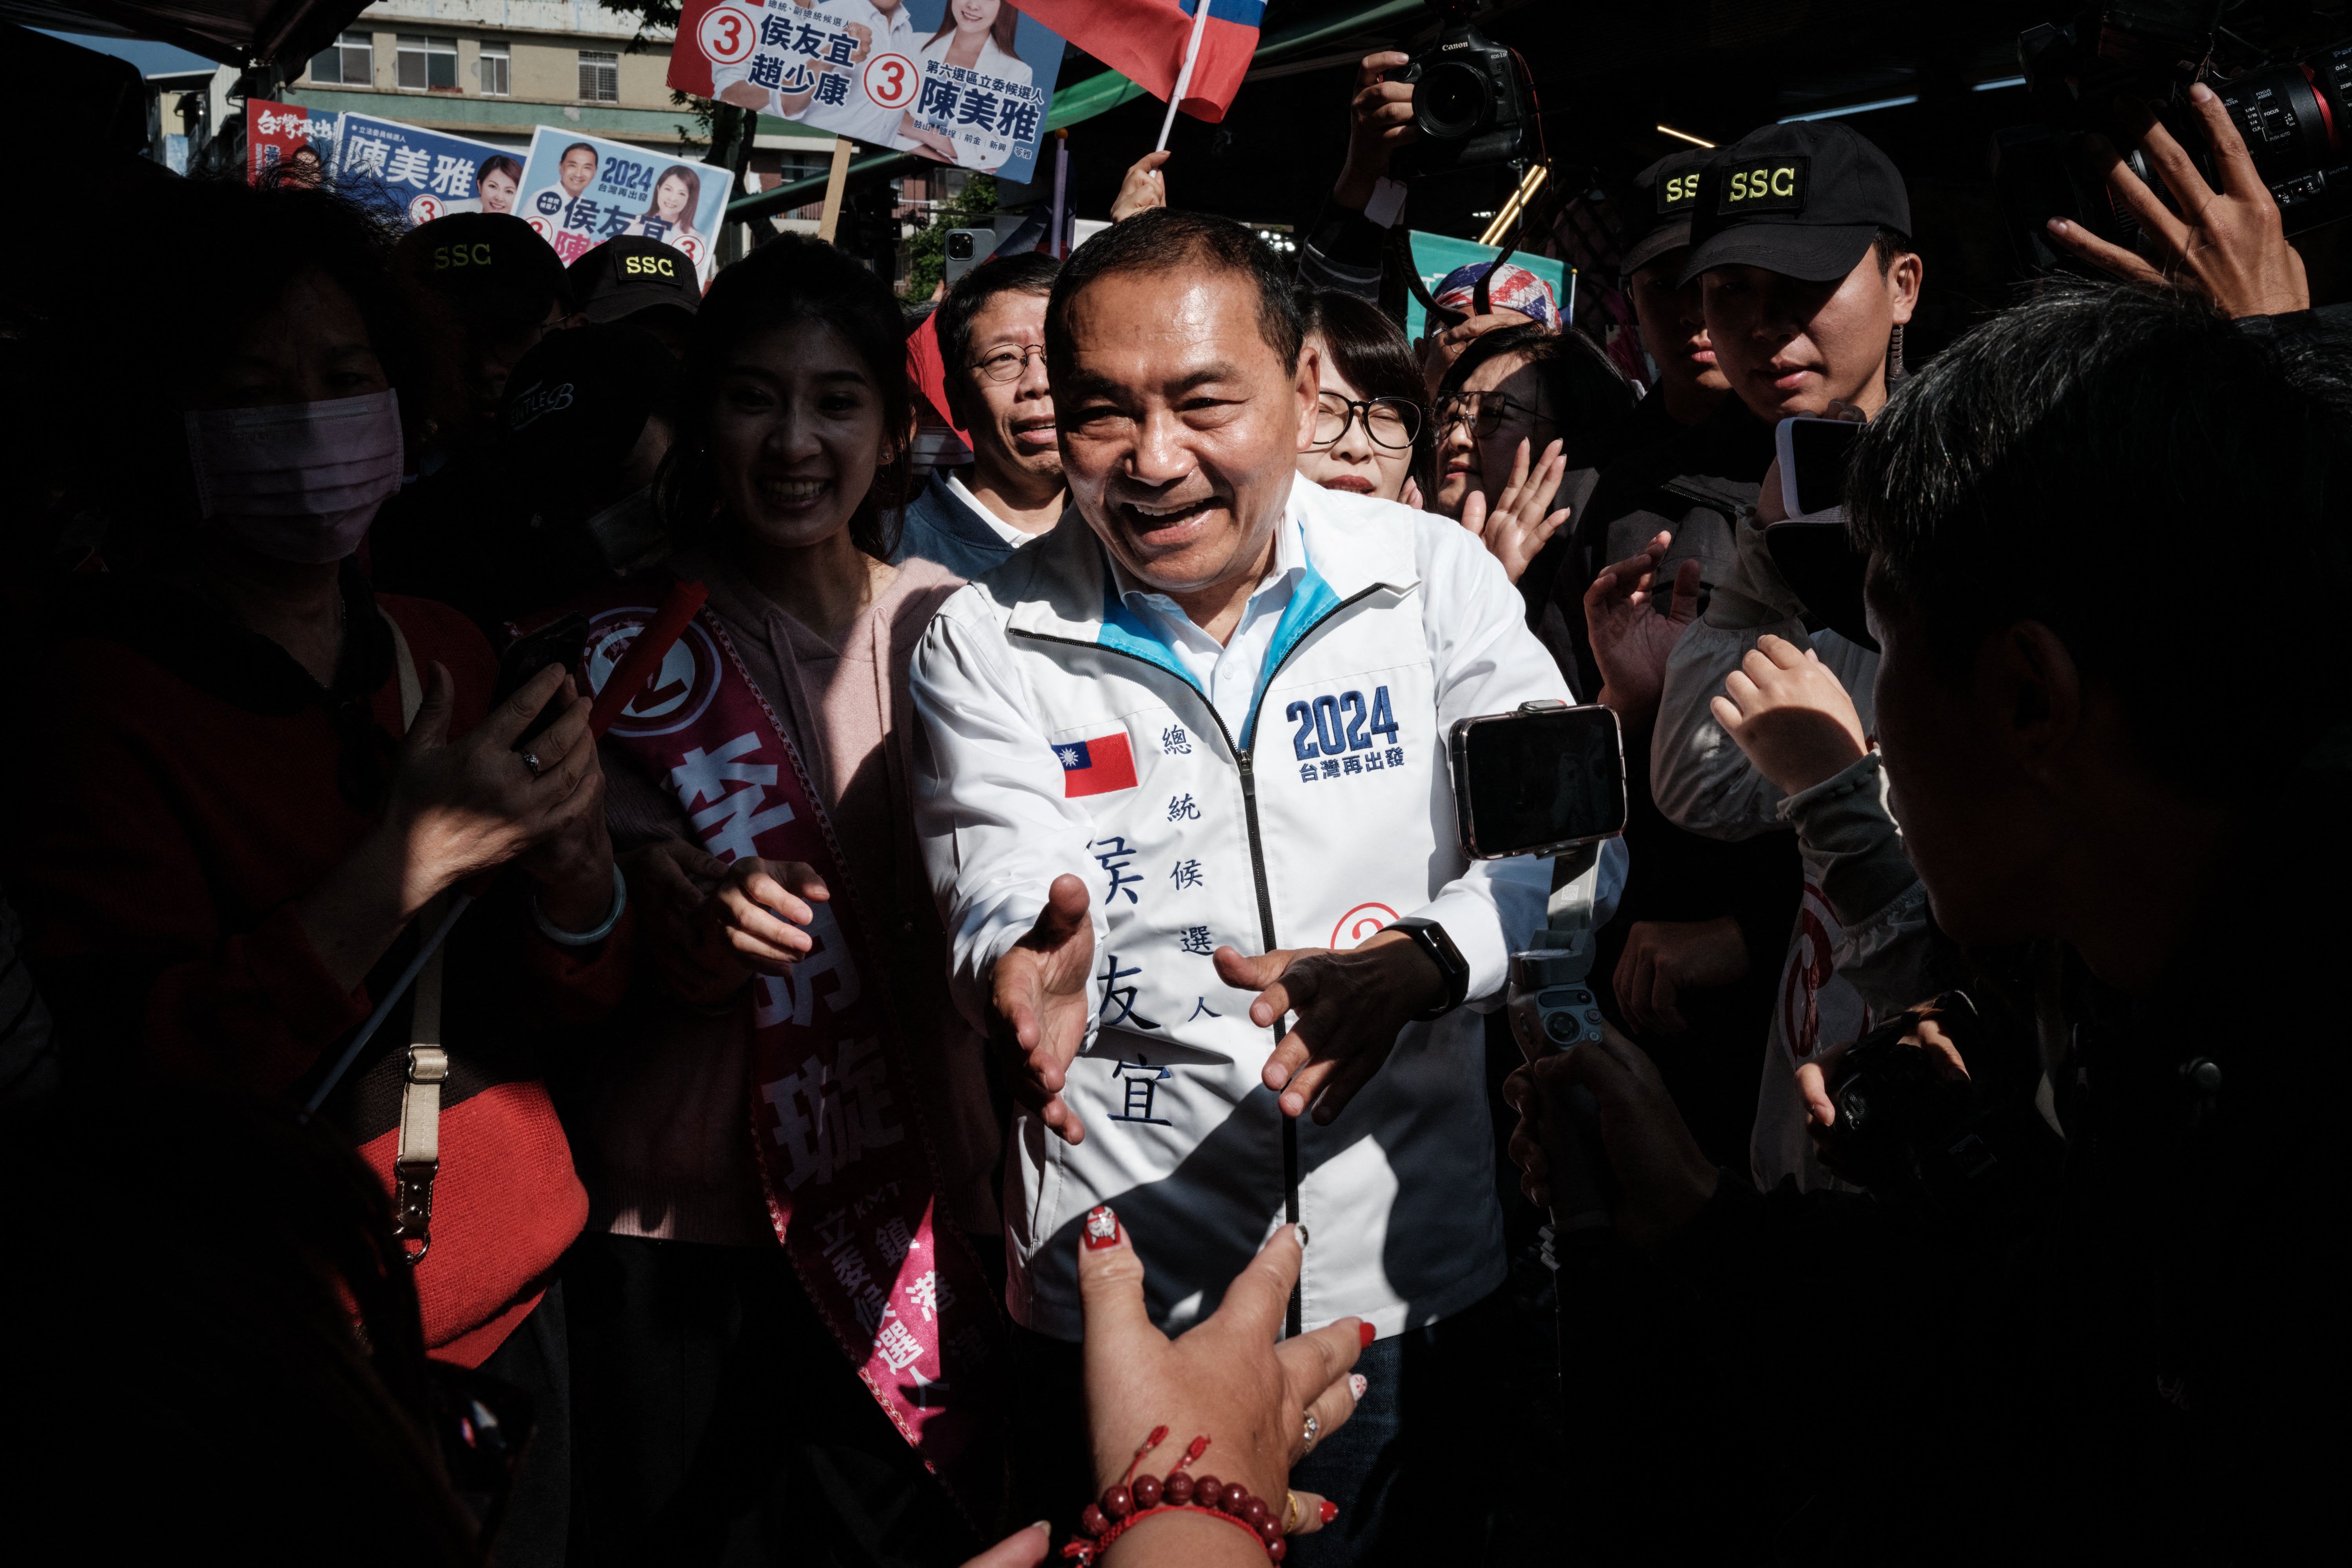 Opposition presidential candidate Hou Yu-ih visiting a market during a campaign visit in Kaohsiung, Taiwan, on Wednesday